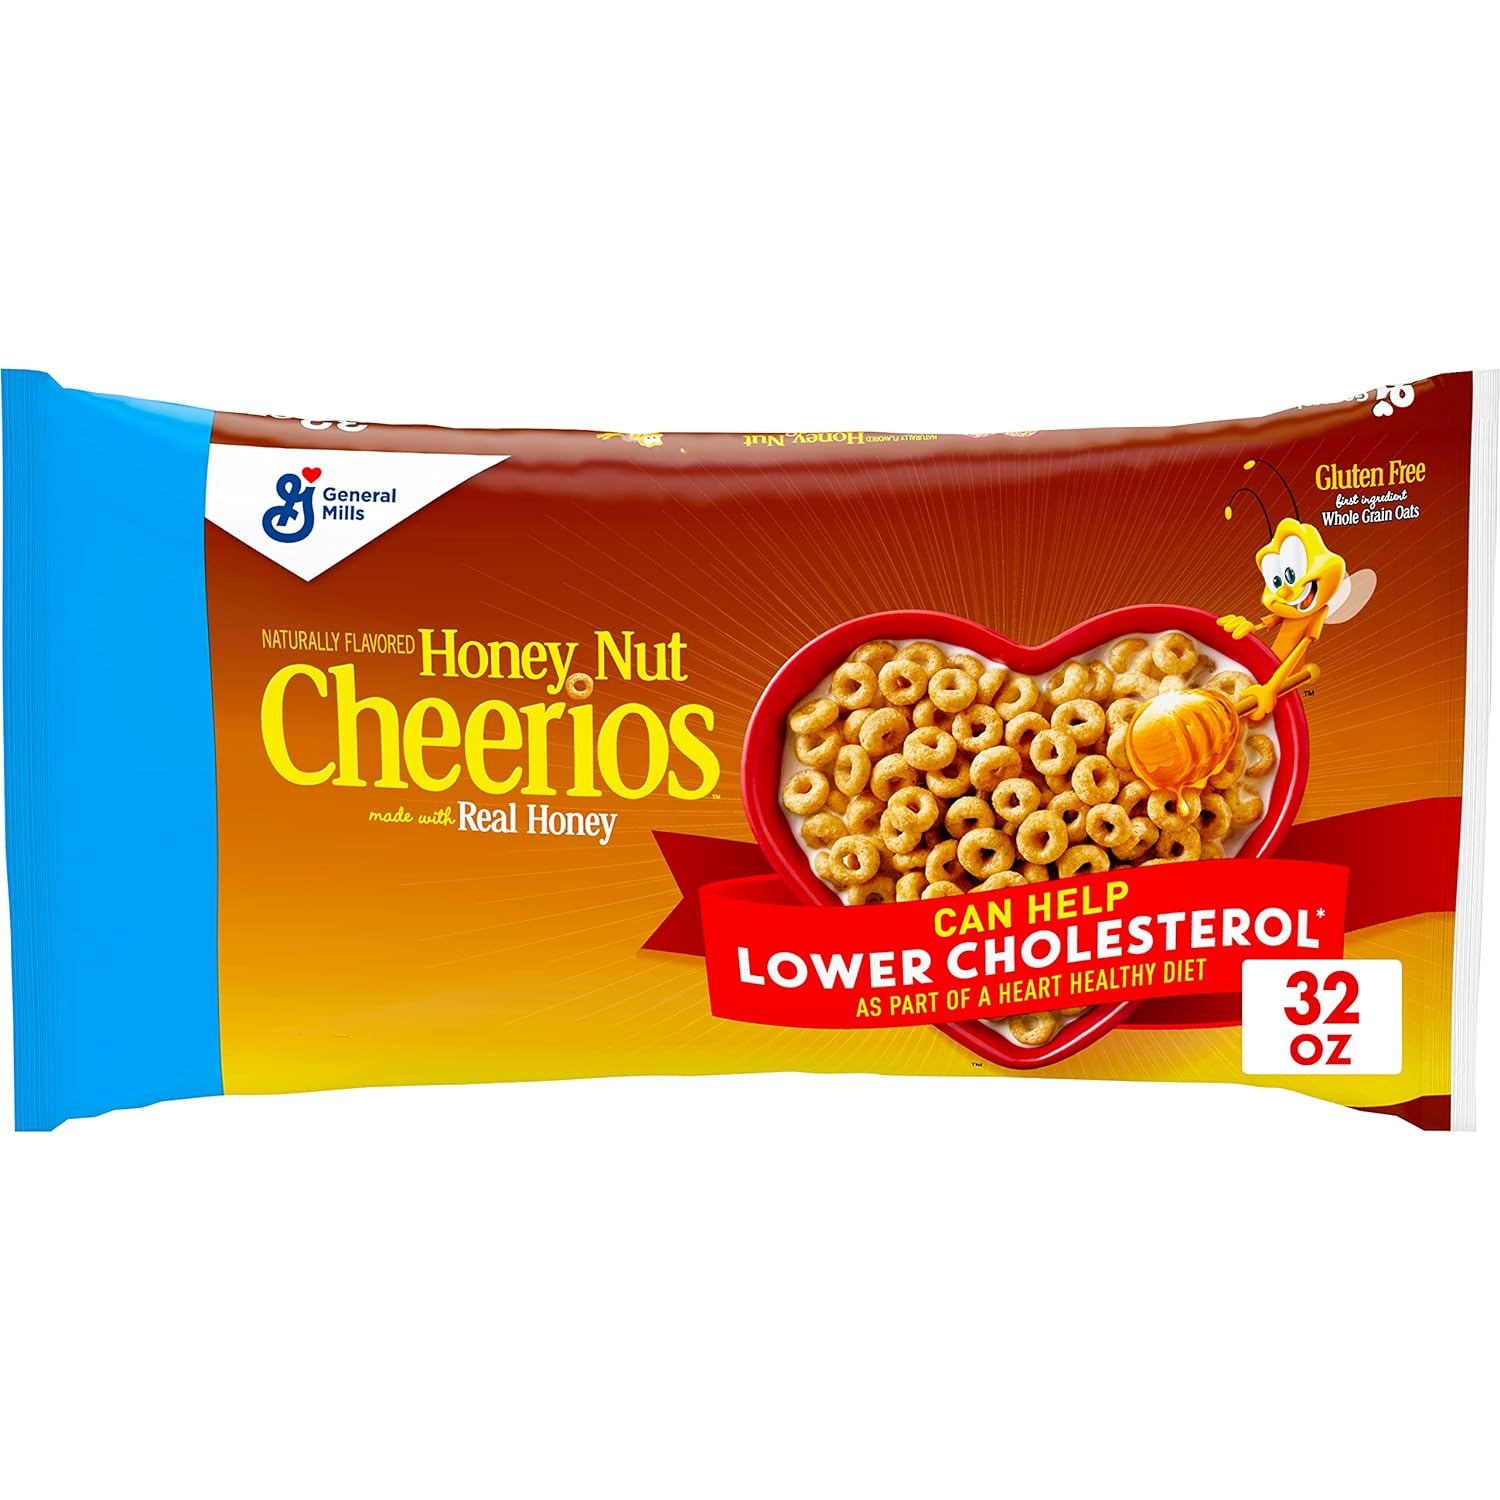 Honey Nut Cheerios Heart Healthy Breakfast Cereal, Gluten Free Cereal With Whole Grain Oats, Value Bag, 32 oz $4.74